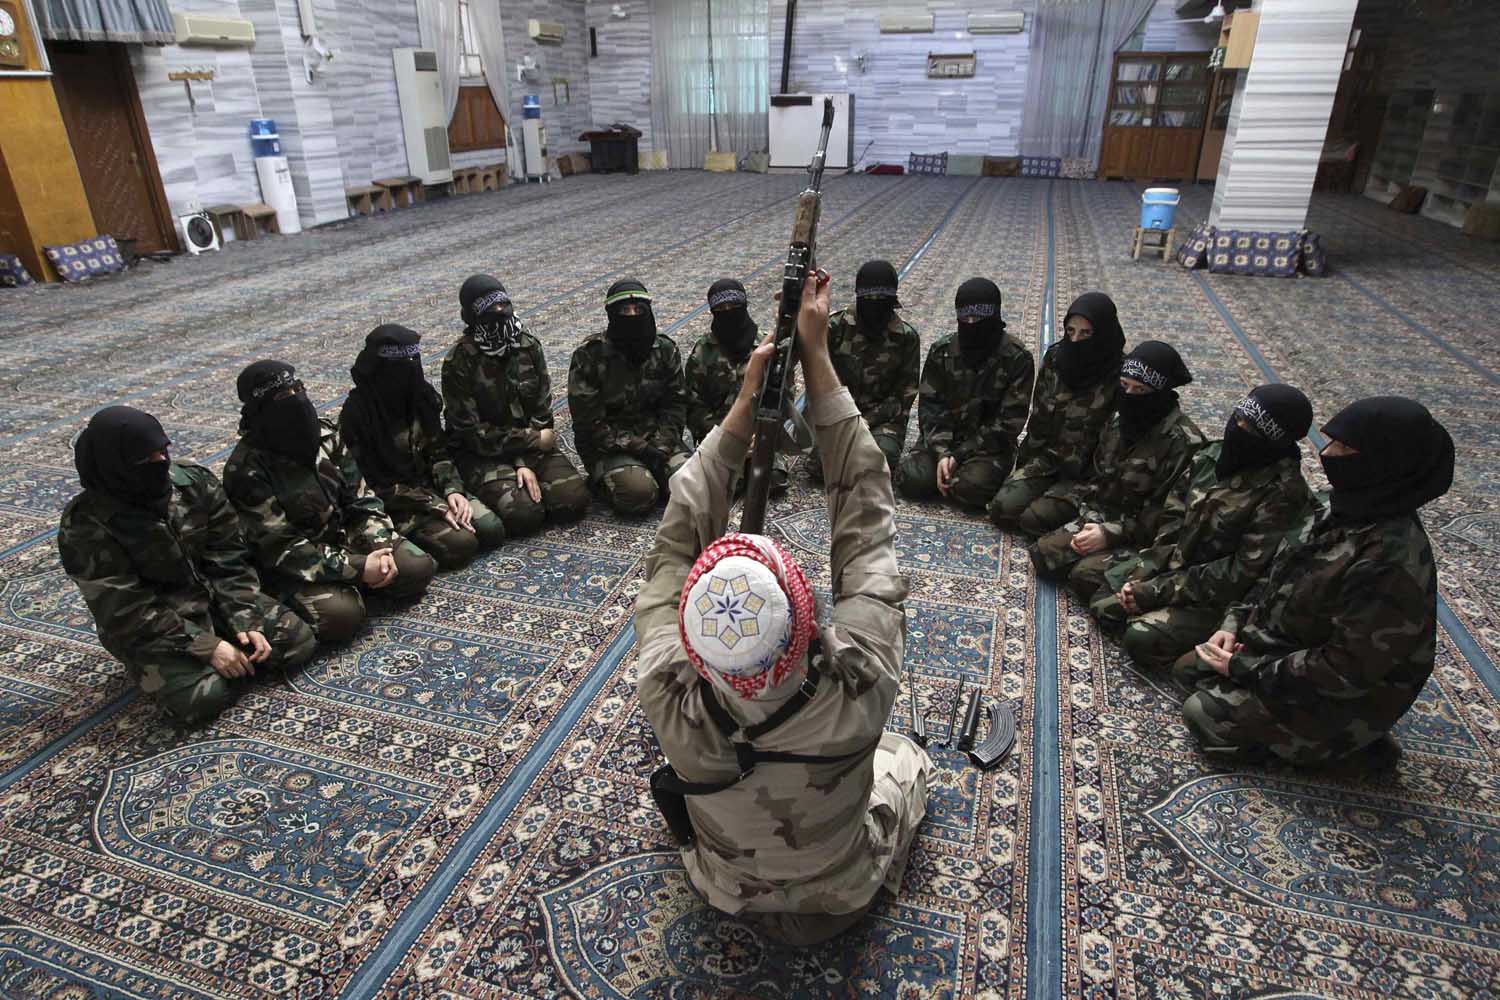 Abu al-Taib, the leader of Ahbab Al-Mustafa Battalion, demonstrates to female members as he holds a gun during a military training in a mosque in the Seif El Dawla neighbourhood in Aleppo